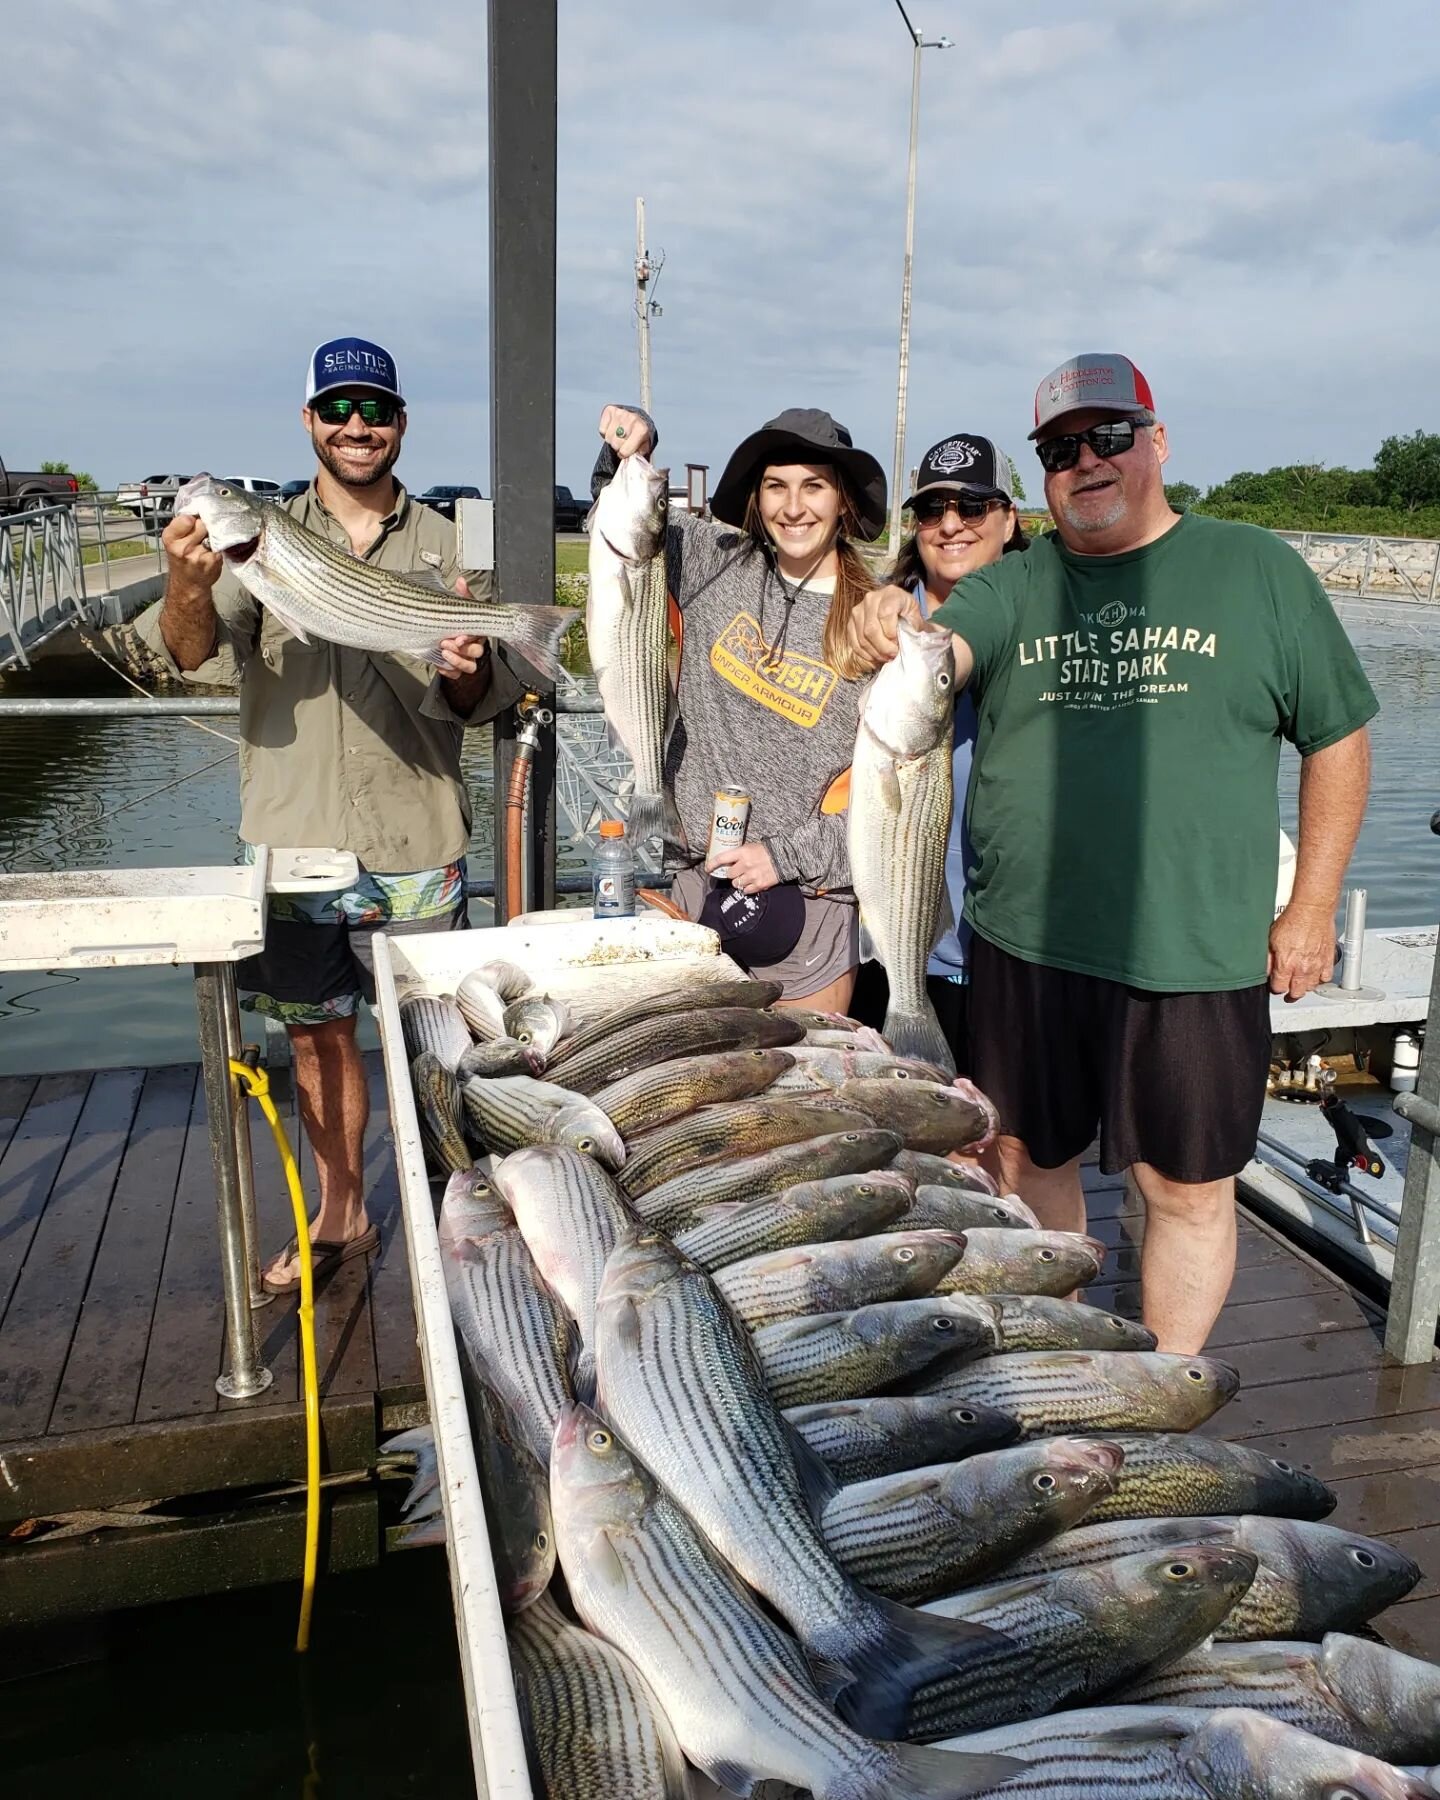 A great weekend out on the lake! Lots of limits and some nice big stripers. A huge thank you to everyone that fished with us this weekend. 

If you'd like to book with us, we've only got a few dates left in June and July. Send us an email or call/tex